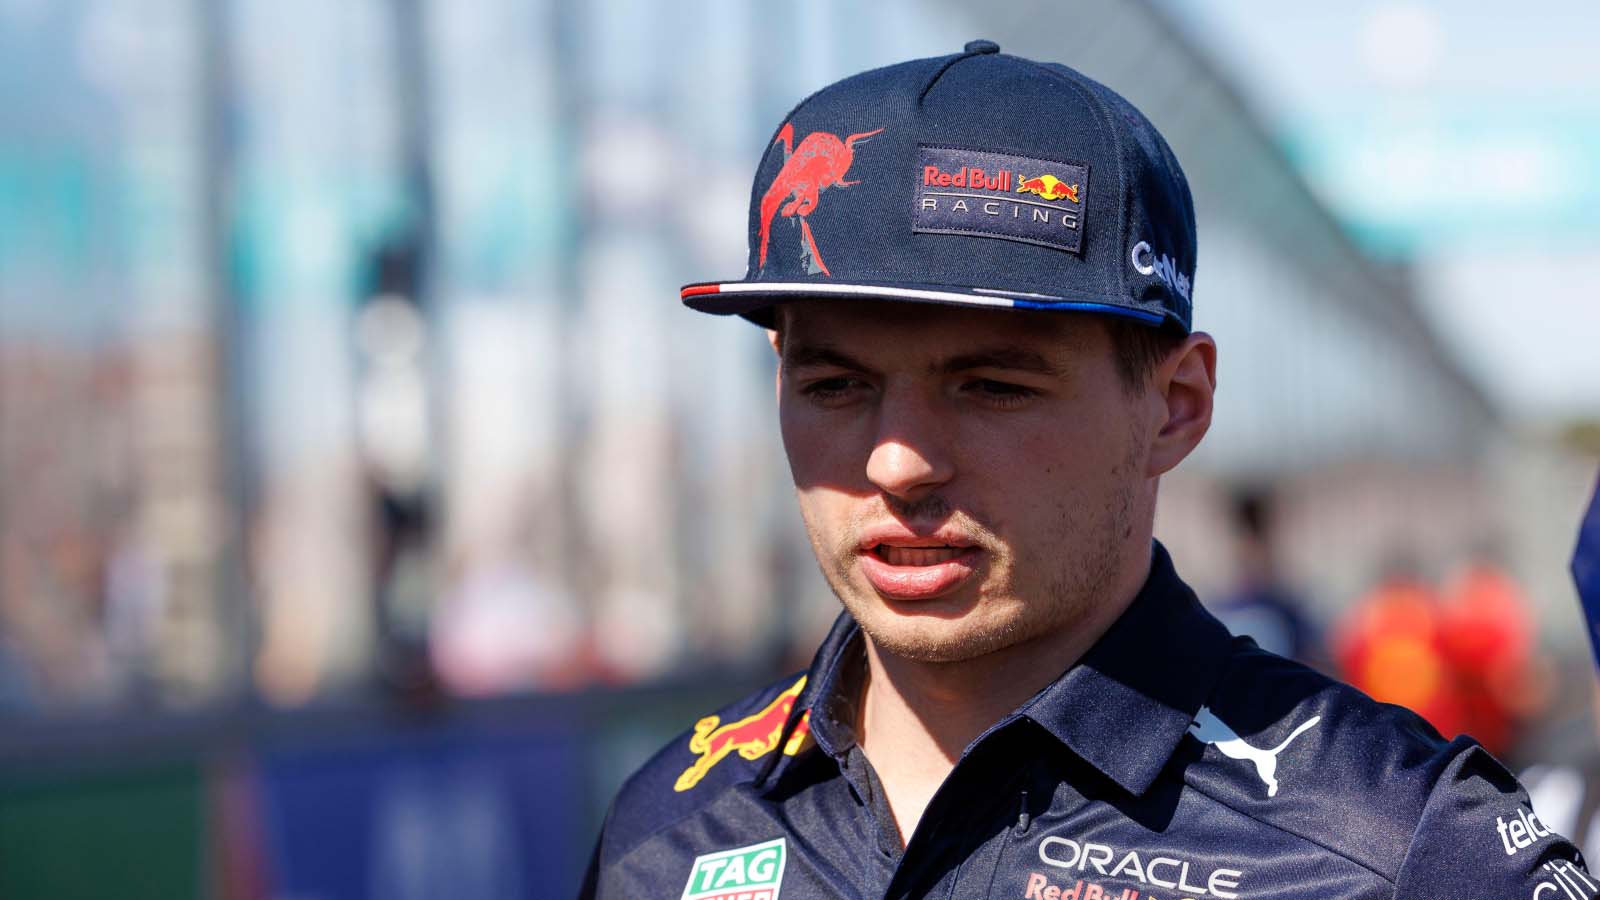 Kardinaal Teleurgesteld Ontslag Max Verstappen: "No clear solution" to current Red Bull issues : PlanetF1